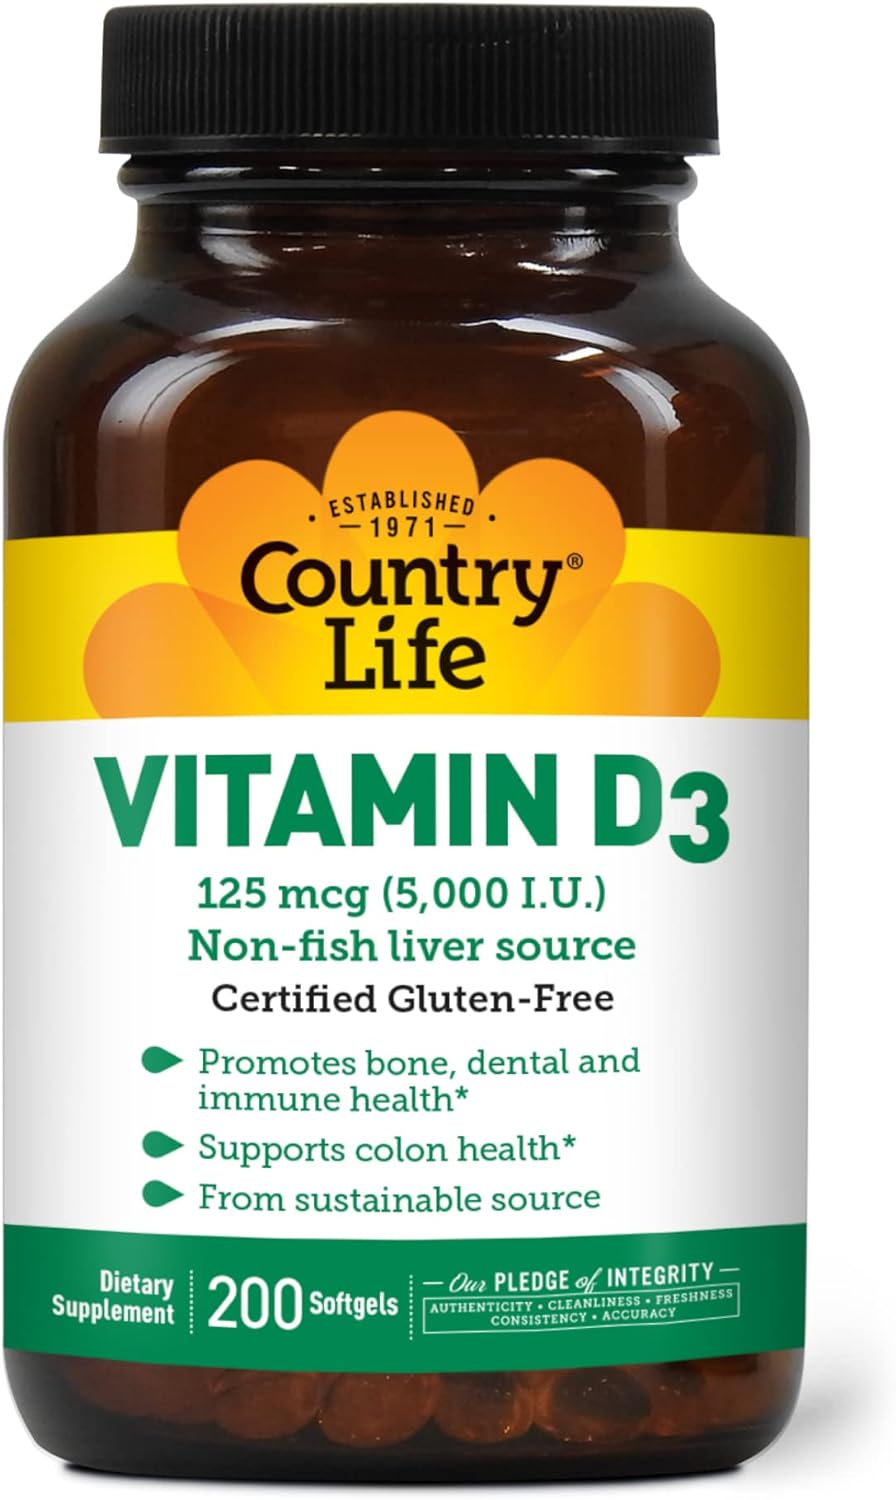 Country Life, Vitamin D3 5000 IU, Supports Healthy Bones, Teeth and Immune System, Daily Supplement, 60 ct